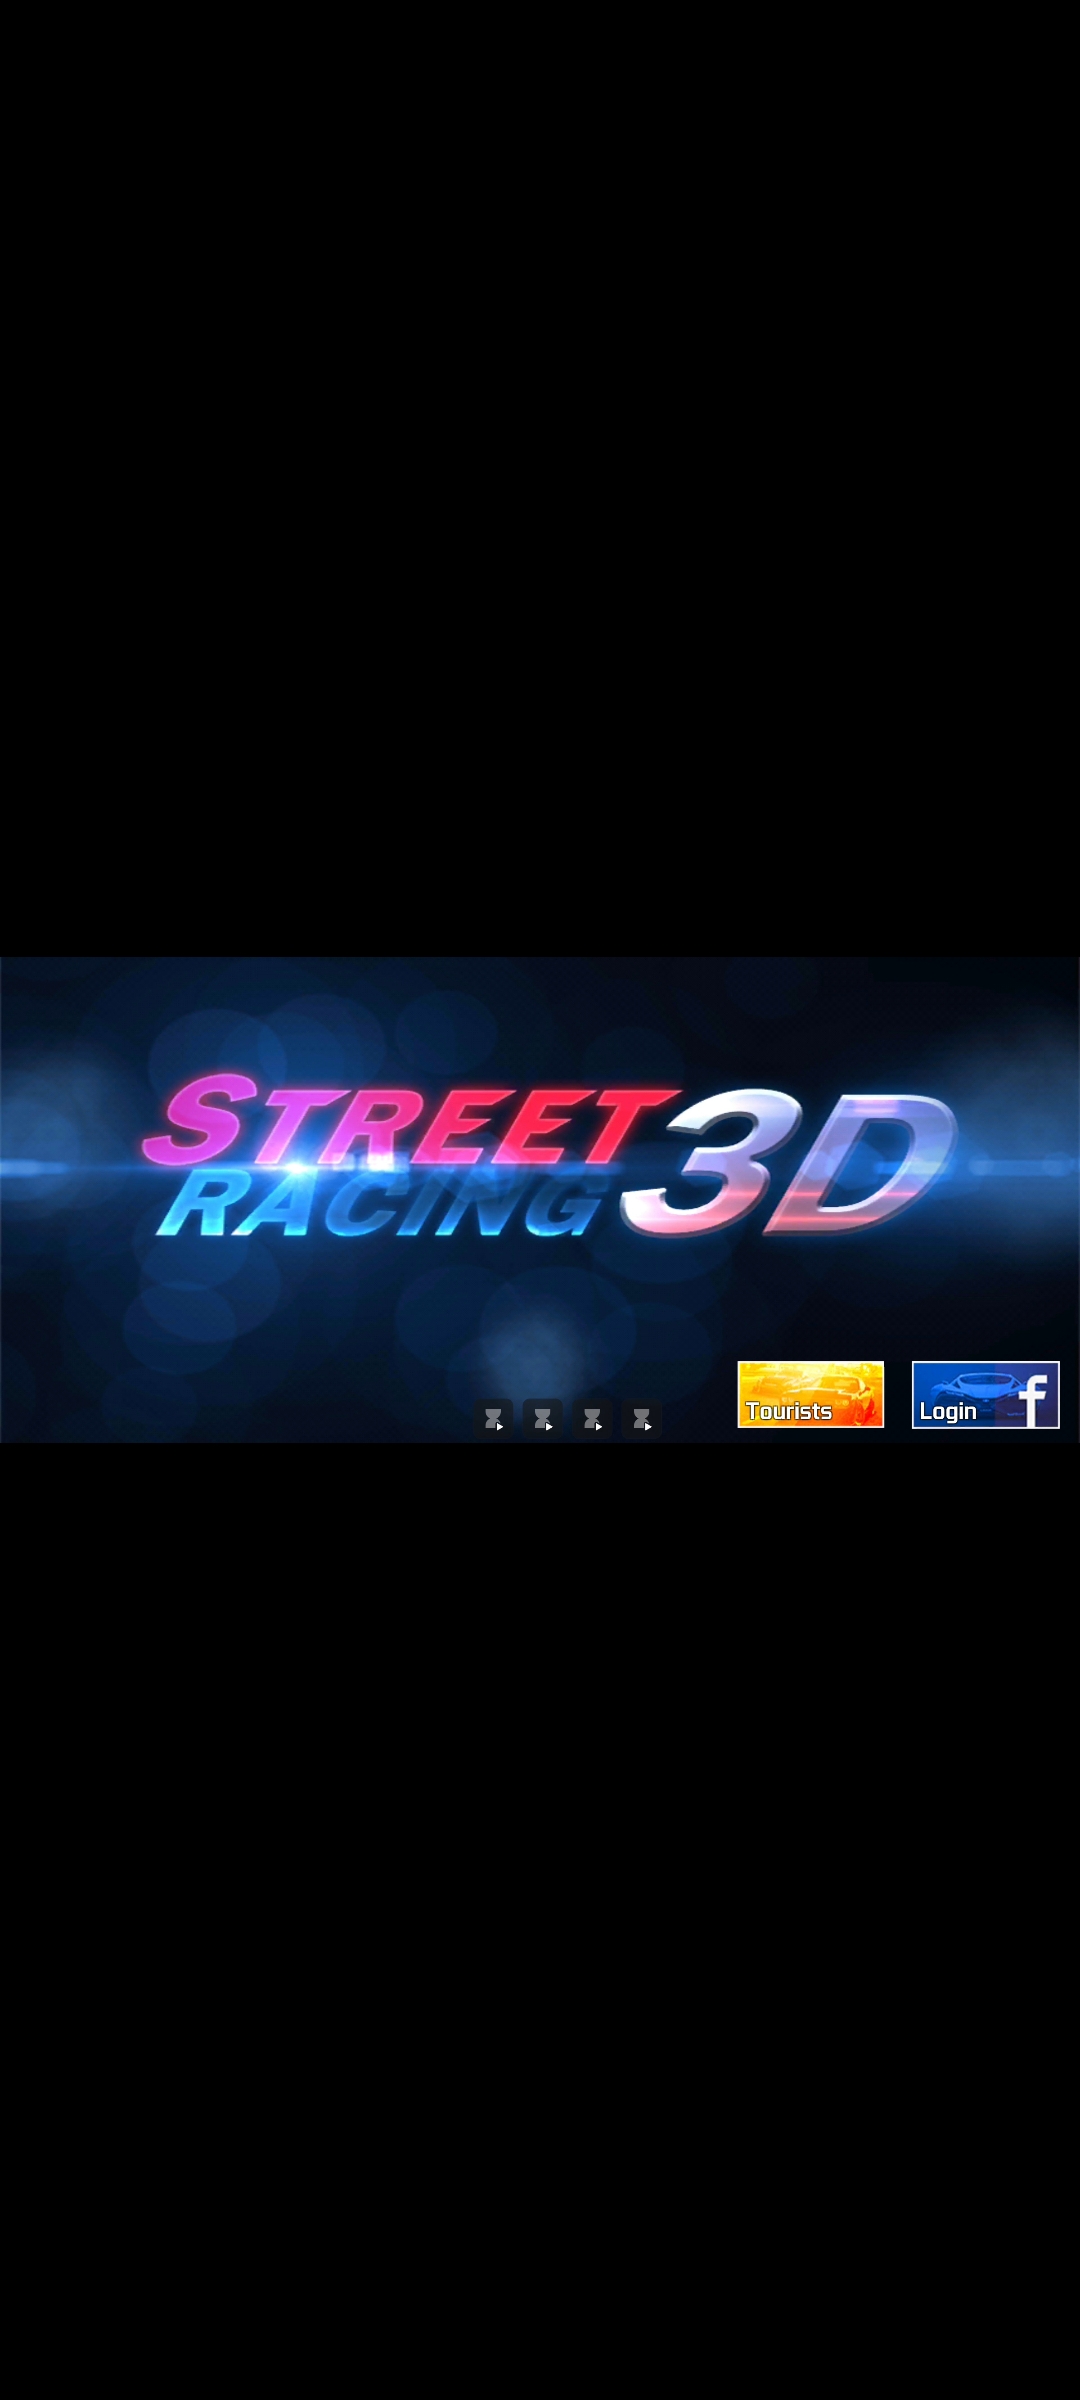 today-i-download-the-street-3d-racing-car-in-play-store-app-blurt